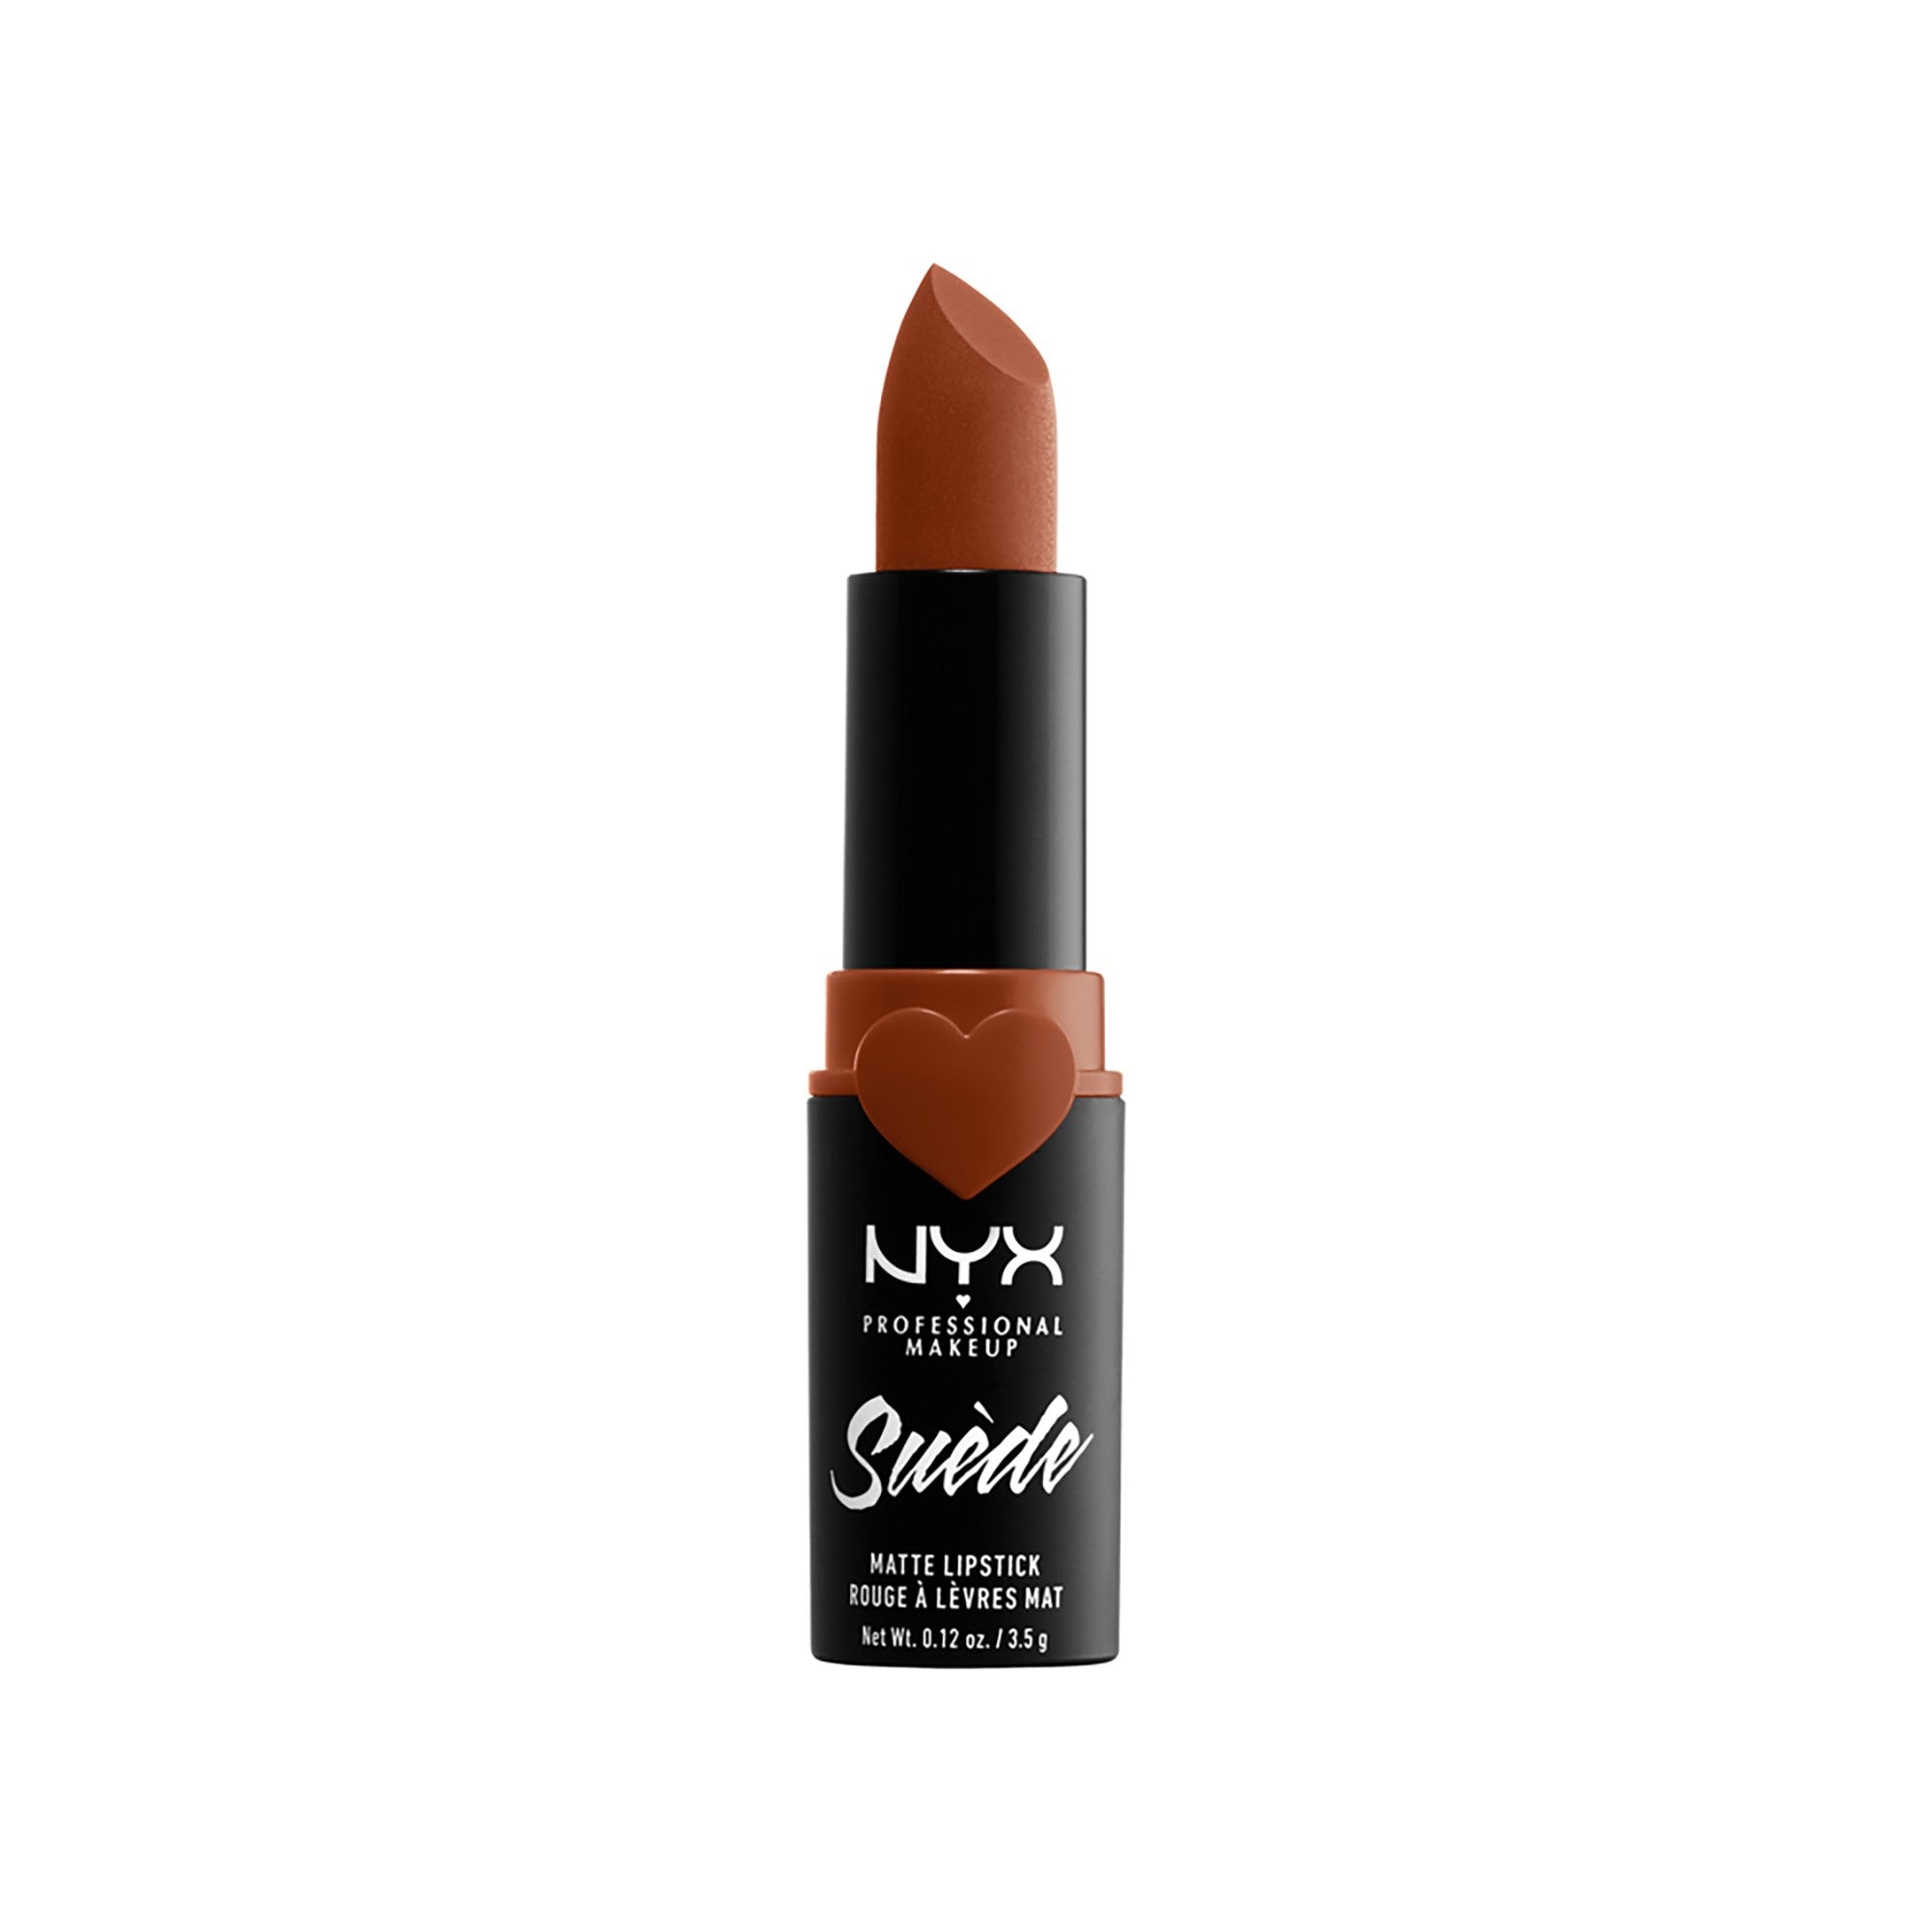 Image of NYX Professional Makeup Suede Matte Lipstick - 08 Peach Don't Kill My Vibe